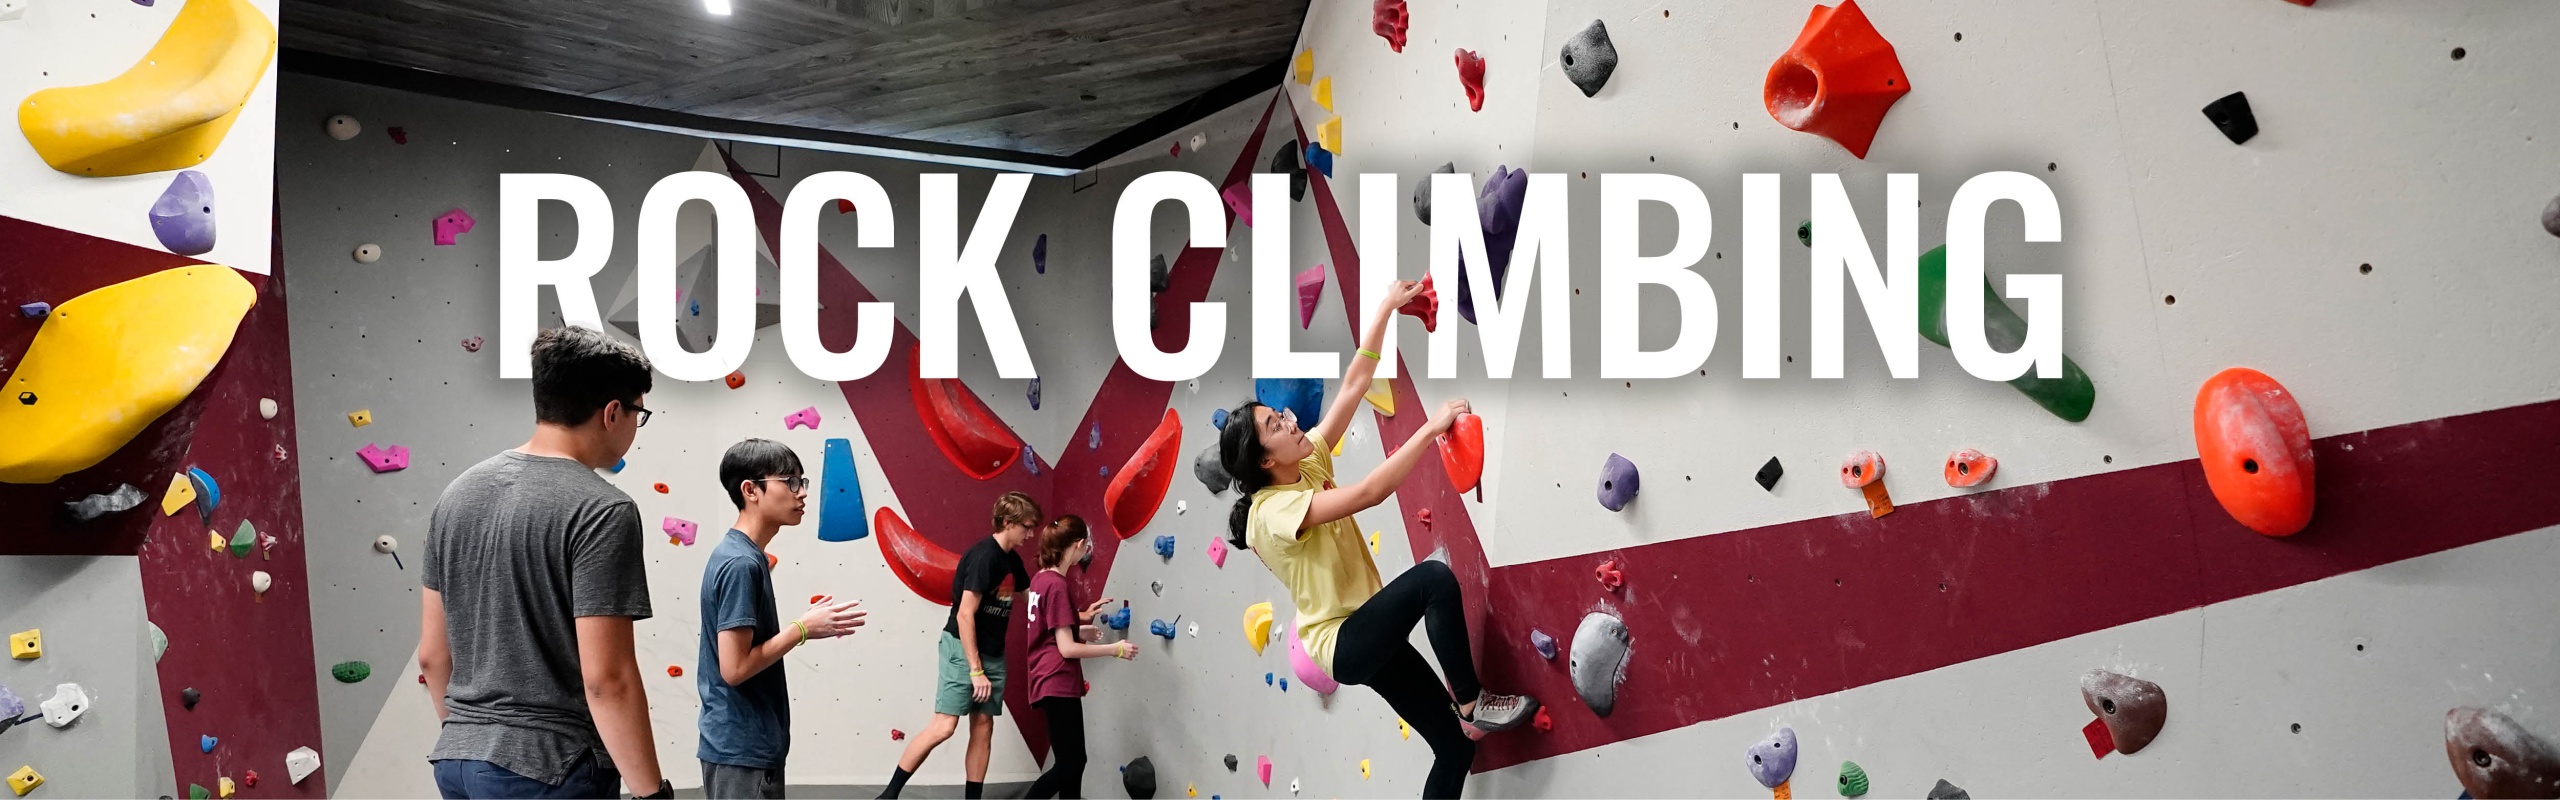 Photo was taken inside the Southside Rec Center at the bouldering wall. Men and women are climbing the wall and the text across the image says "Rock Climbing"